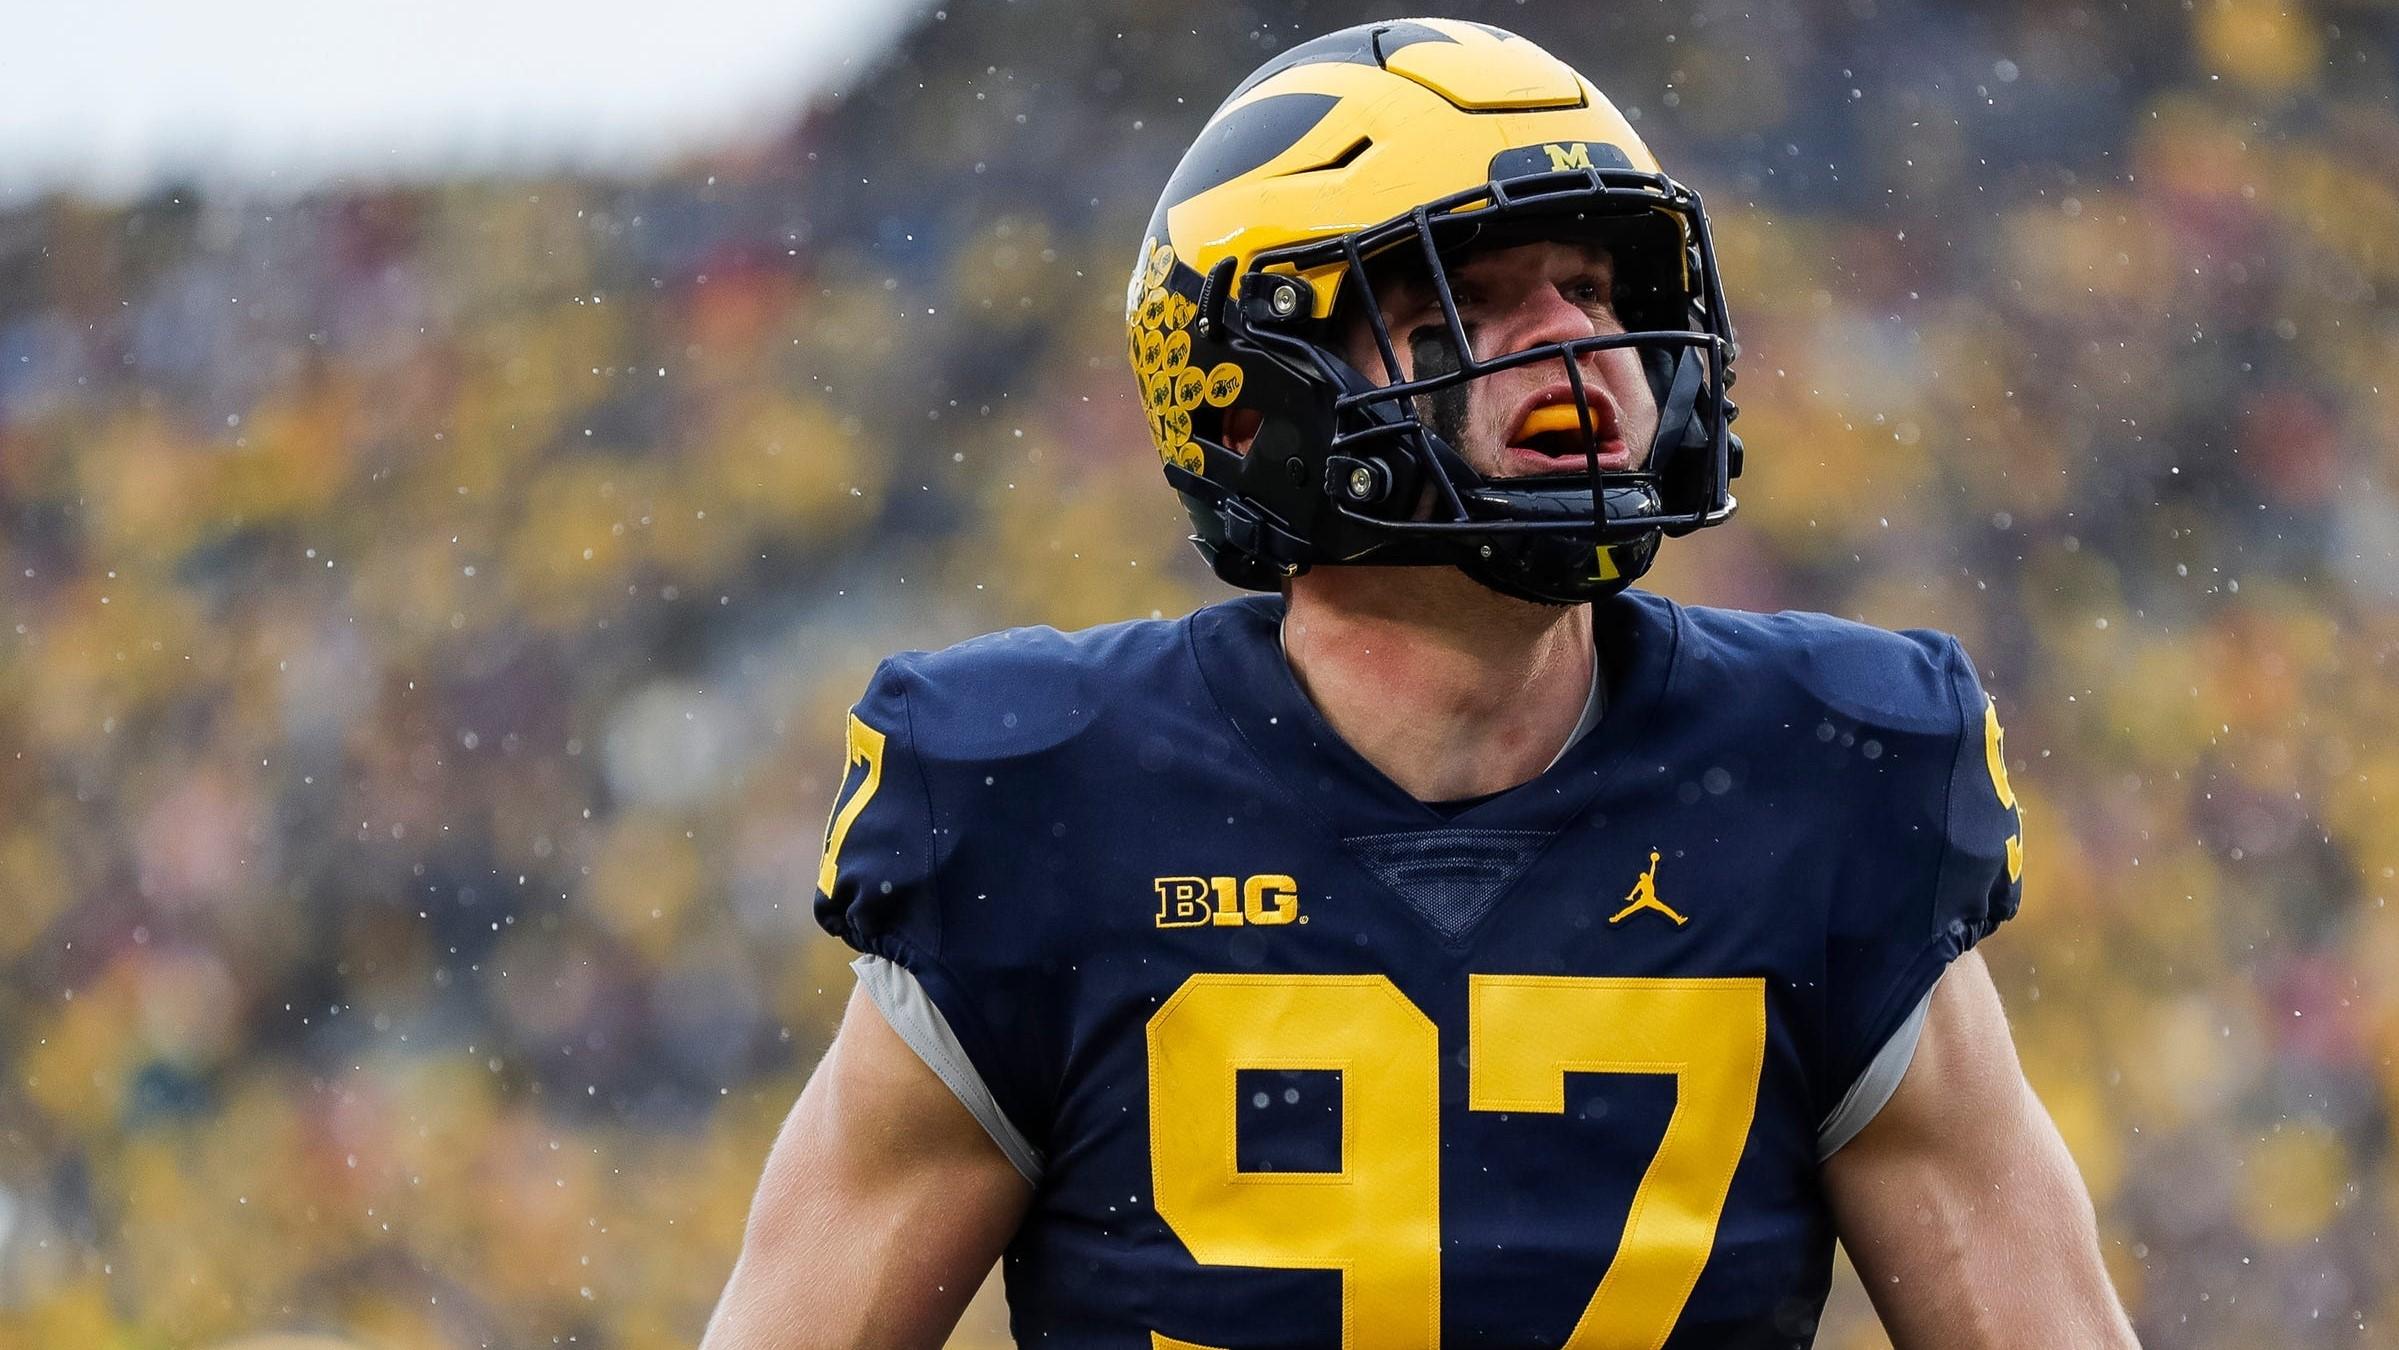 Michigan defensive end Aidan Hutchinson collected three sacks against Ohio State. Syndication Detroit Free Press / Junfu Han / USA TODAY NETWORK